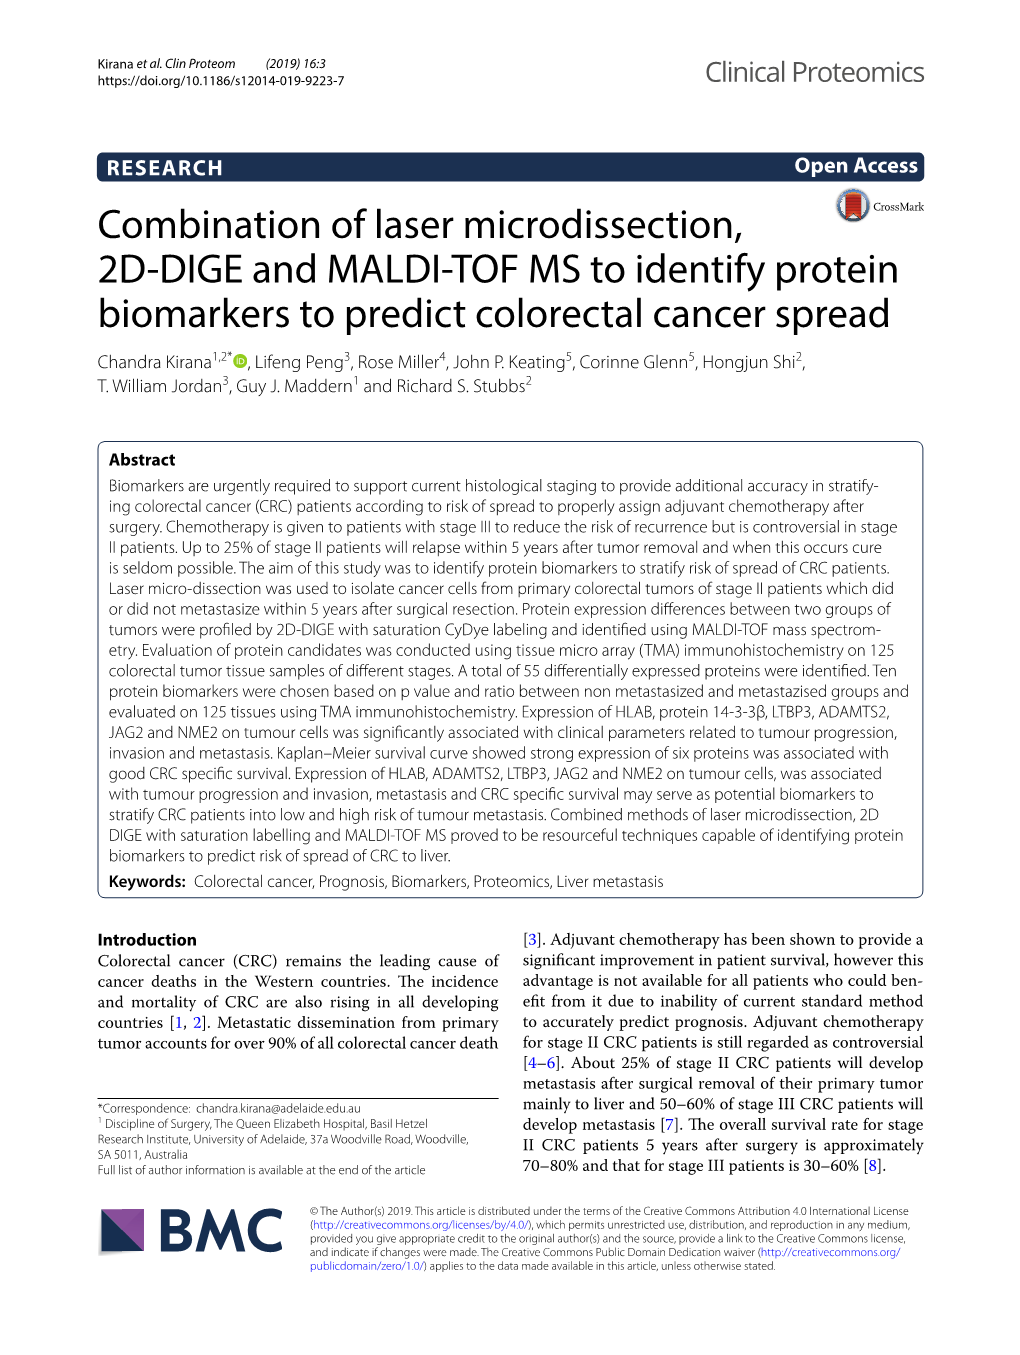 Combination of Laser Microdissection, 2D-DIGE and MALDI-TOF MS to Identify Protein Biomarkers to Predict Colorectal Cancer Sprea